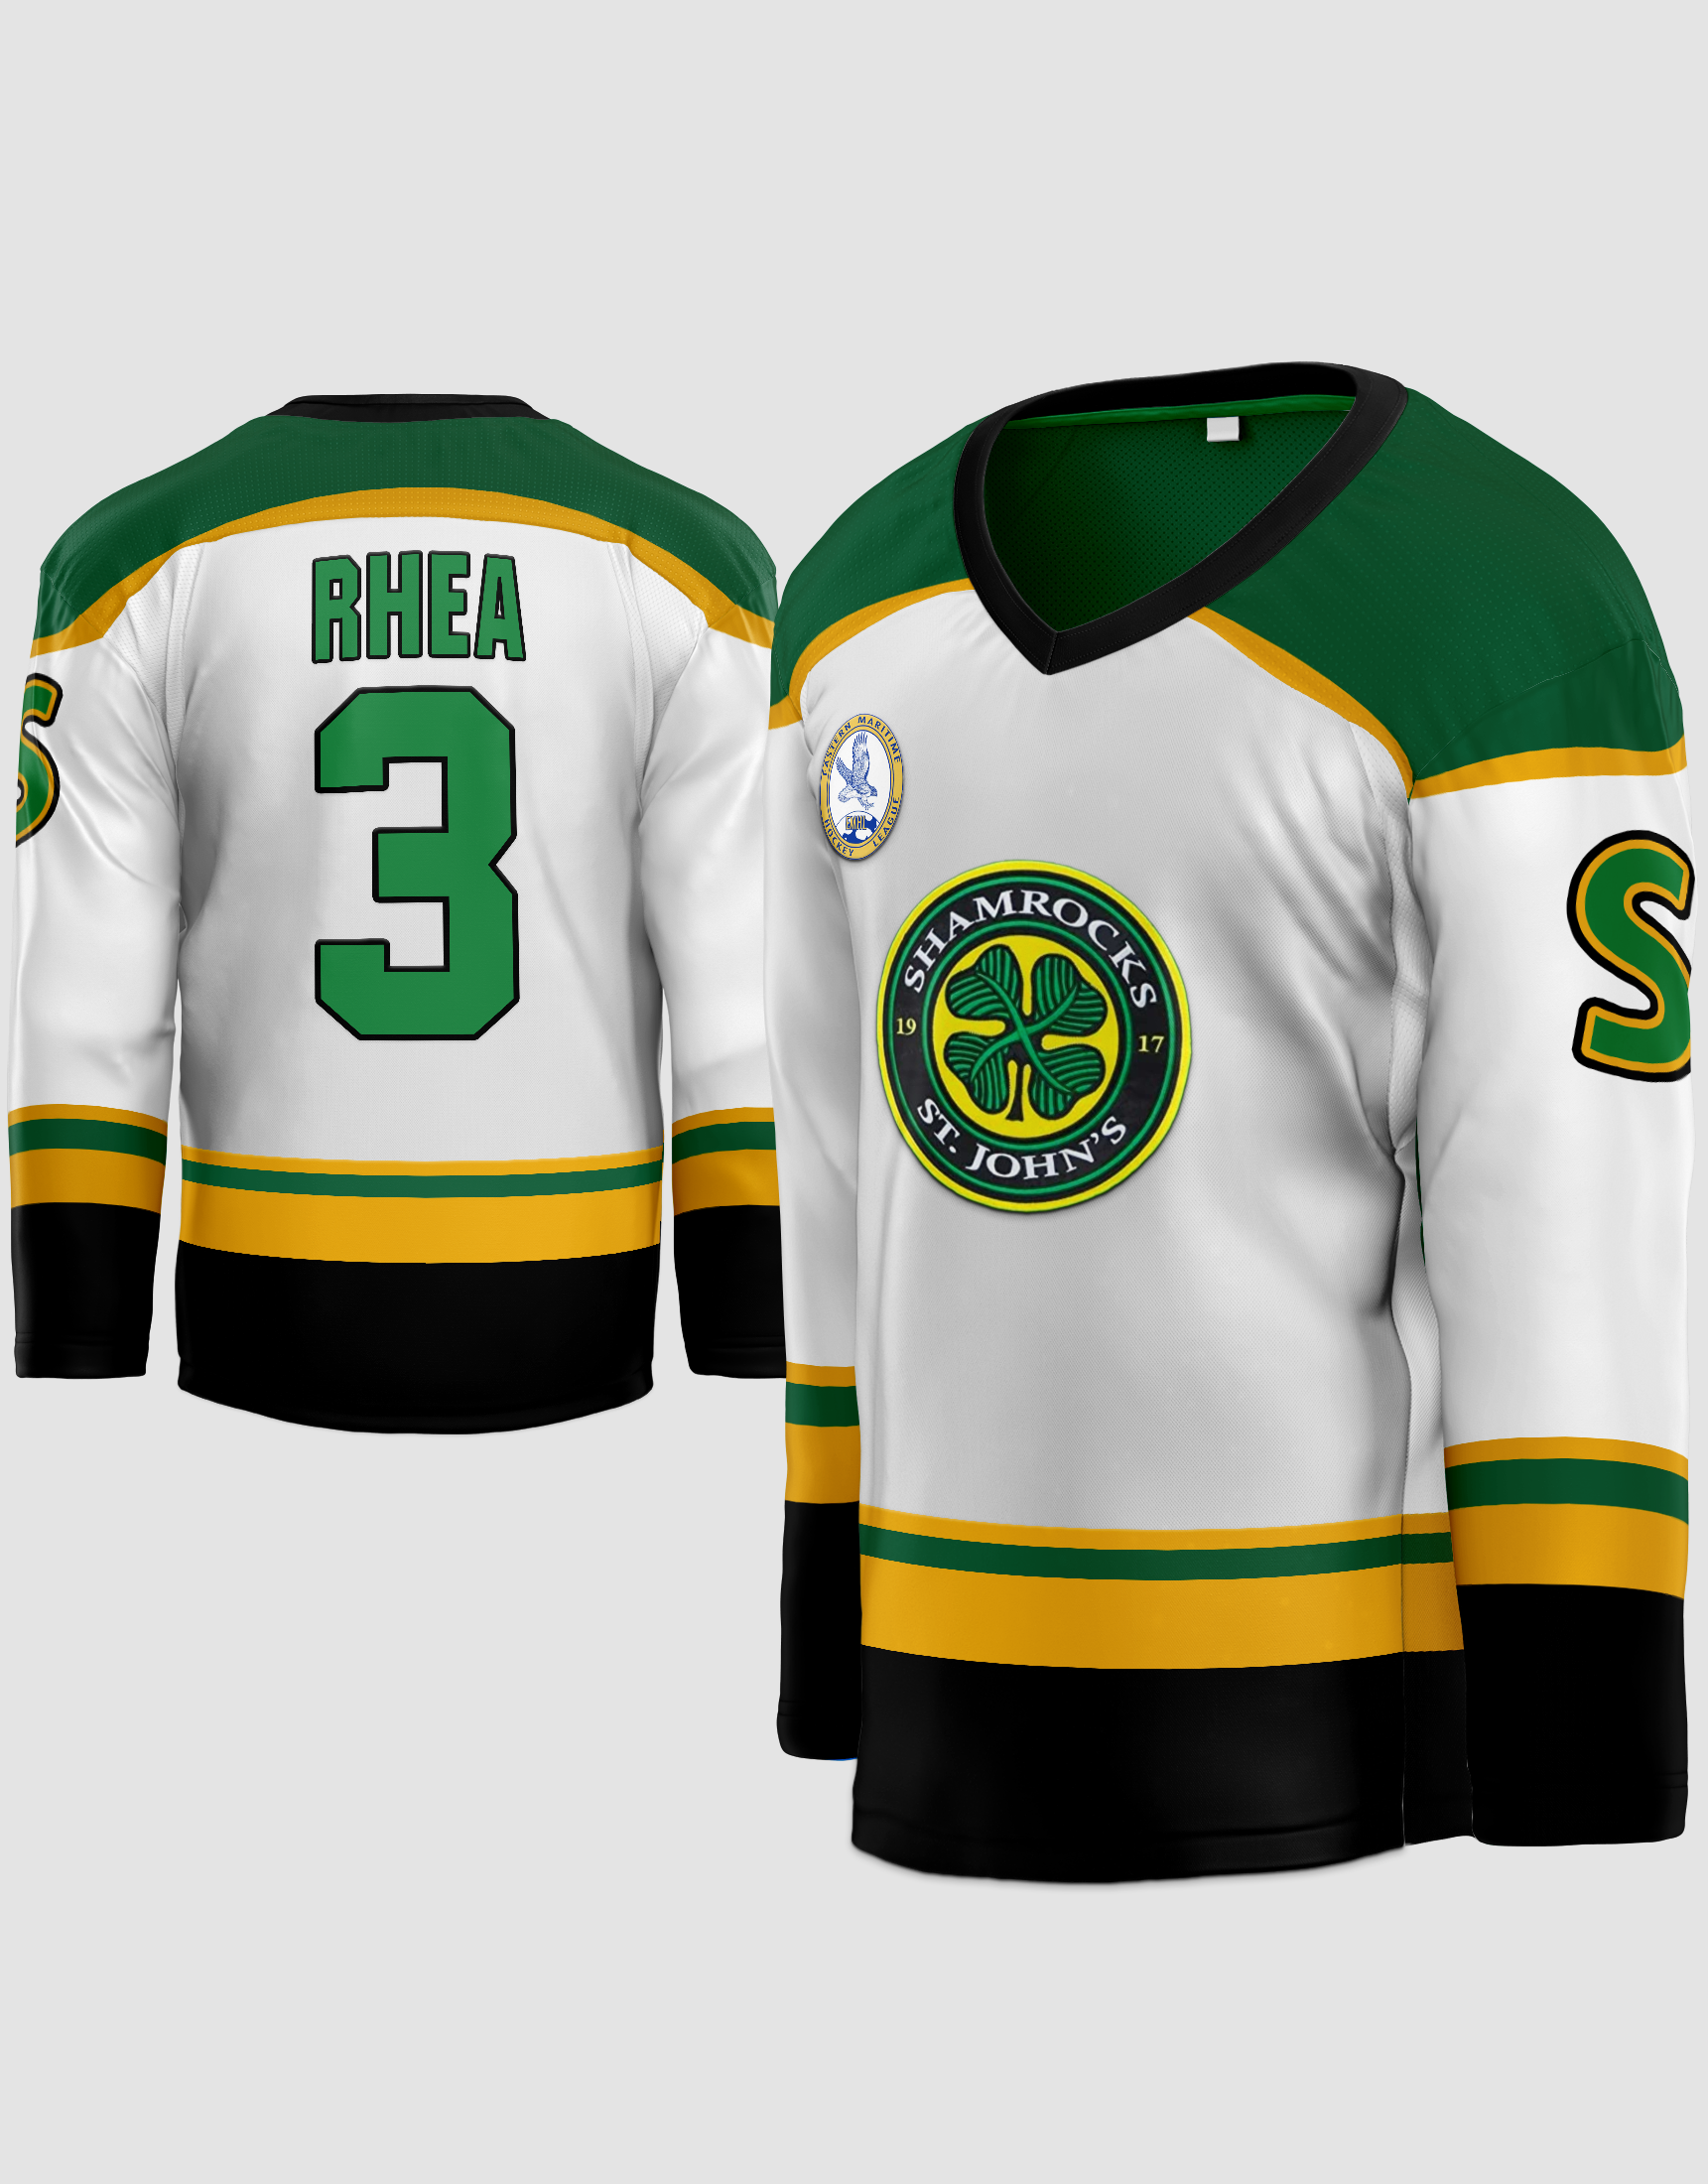  3 Ross The BOSS Rhea ST John's Shamrocks Stitched Hockey Jersey  with EMHL Patch White Green : Clothing, Shoes & Jewelry